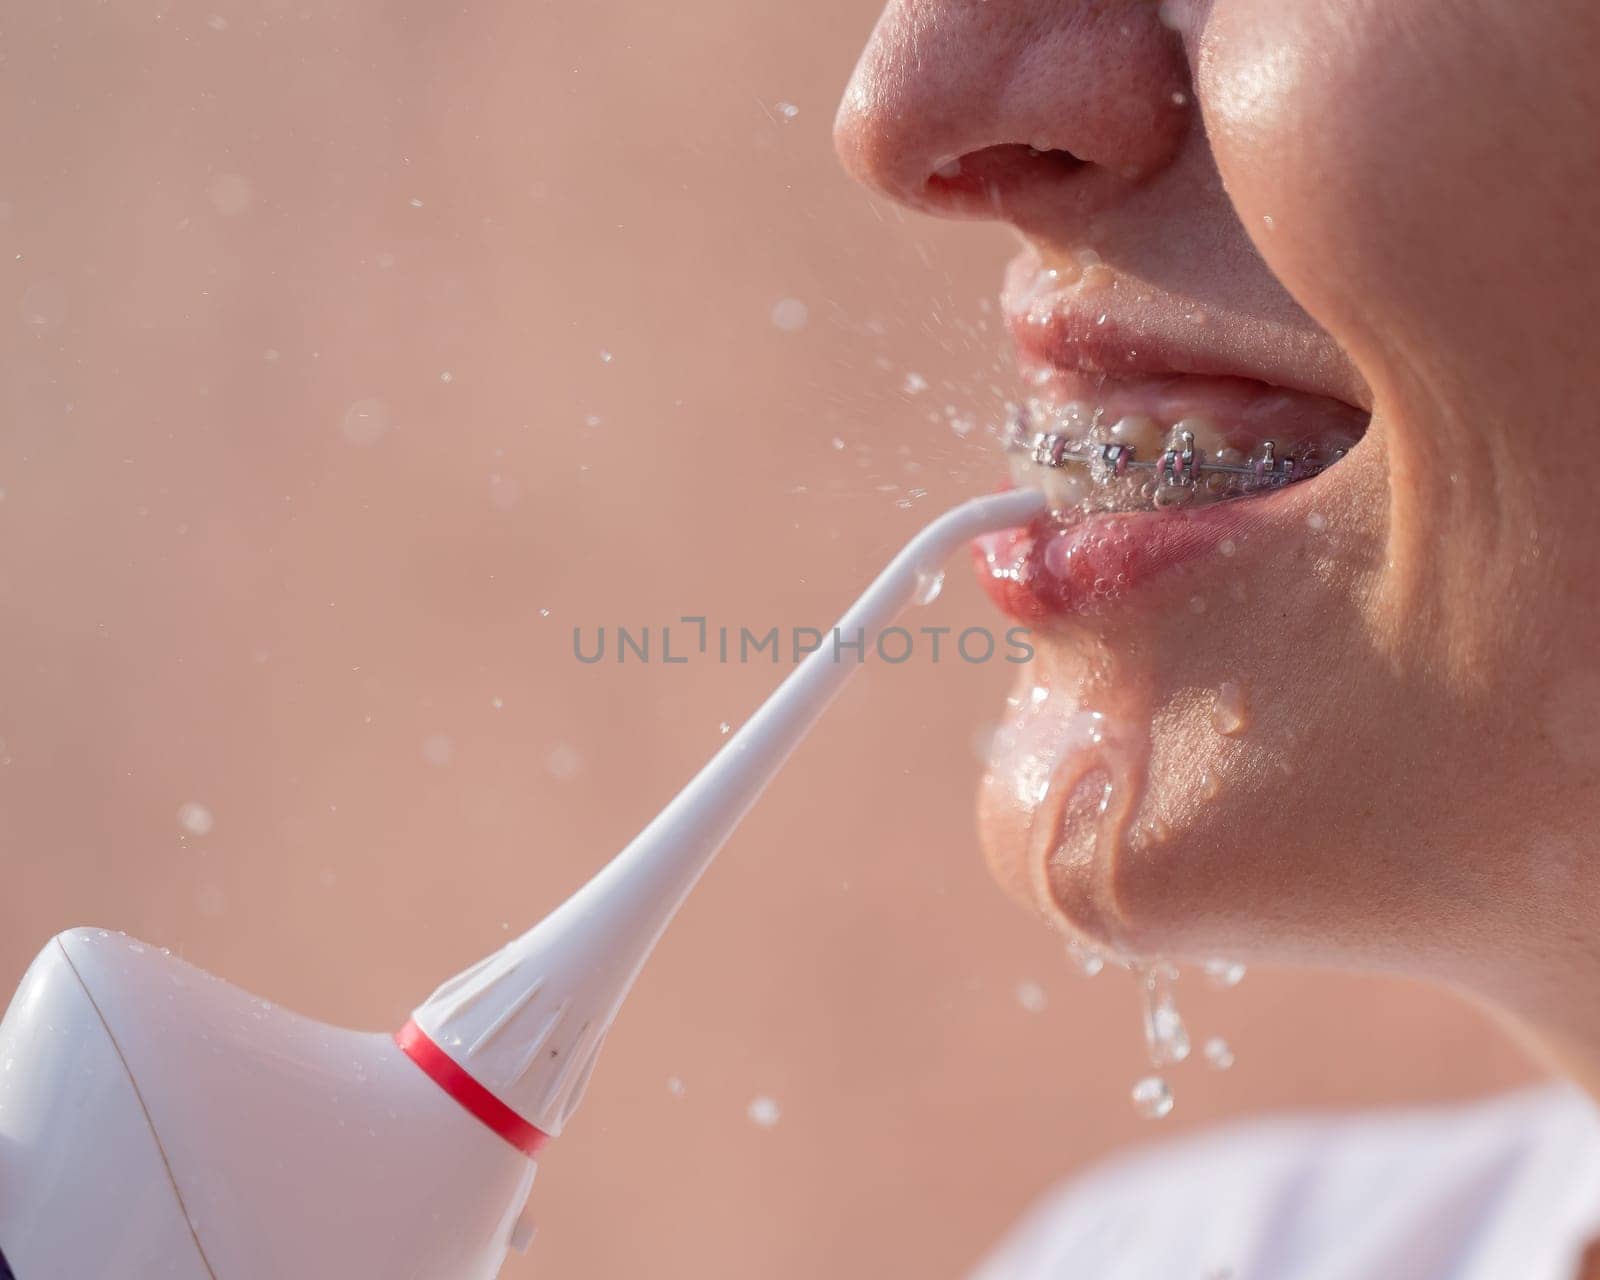 A woman with braces on her teeth uses an irrigator. Close-up portrait. by mrwed54